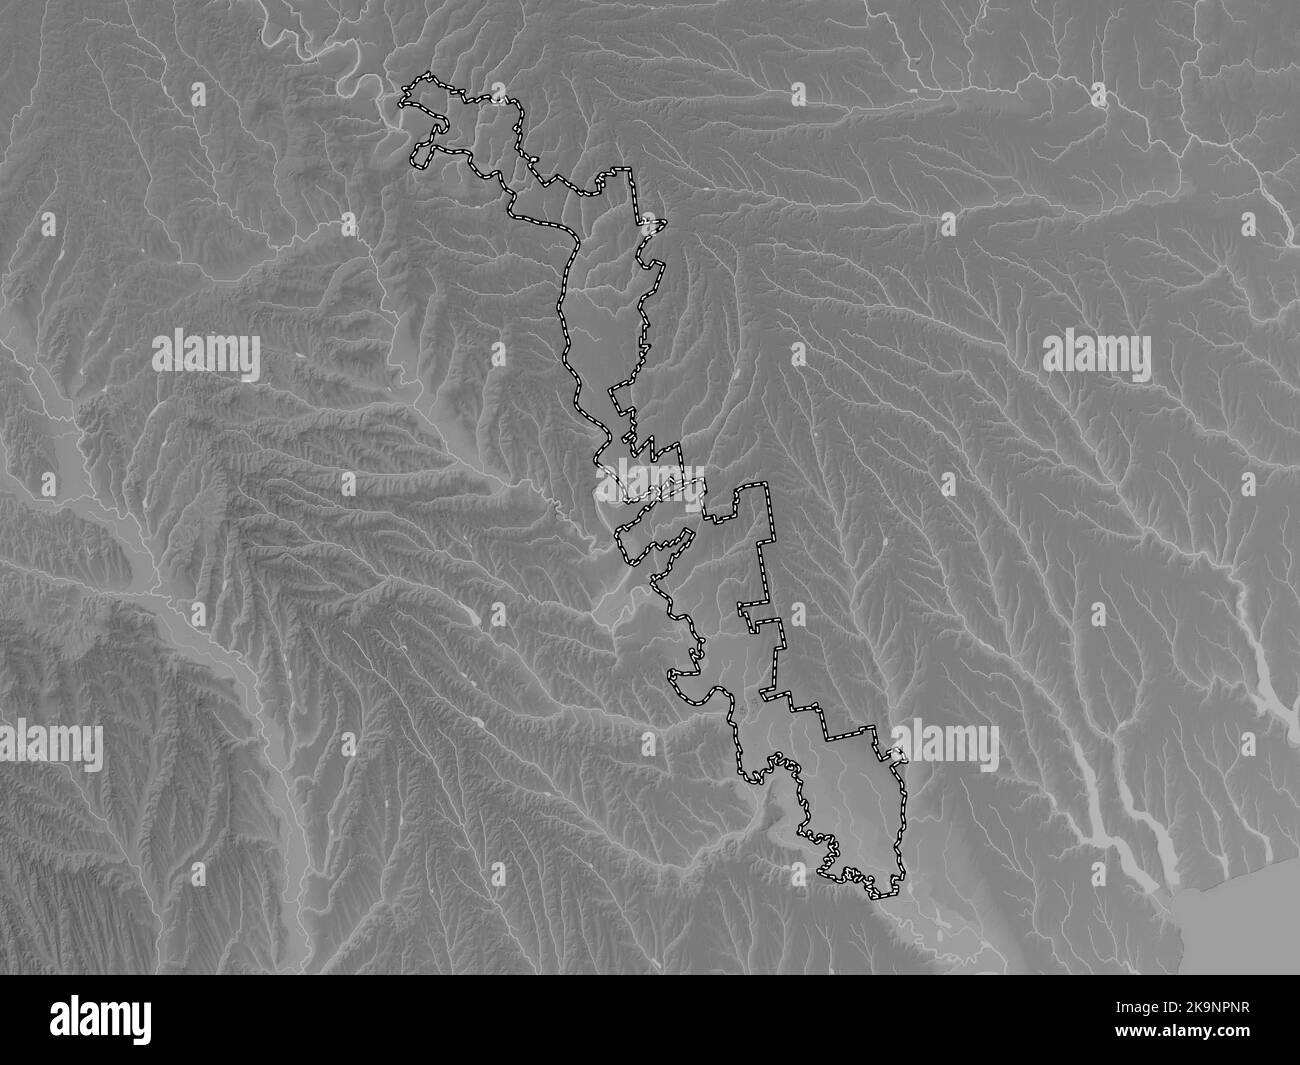 Transnistria, territorial unit of Moldova. Grayscale elevation map with lakes and rivers Stock Photo